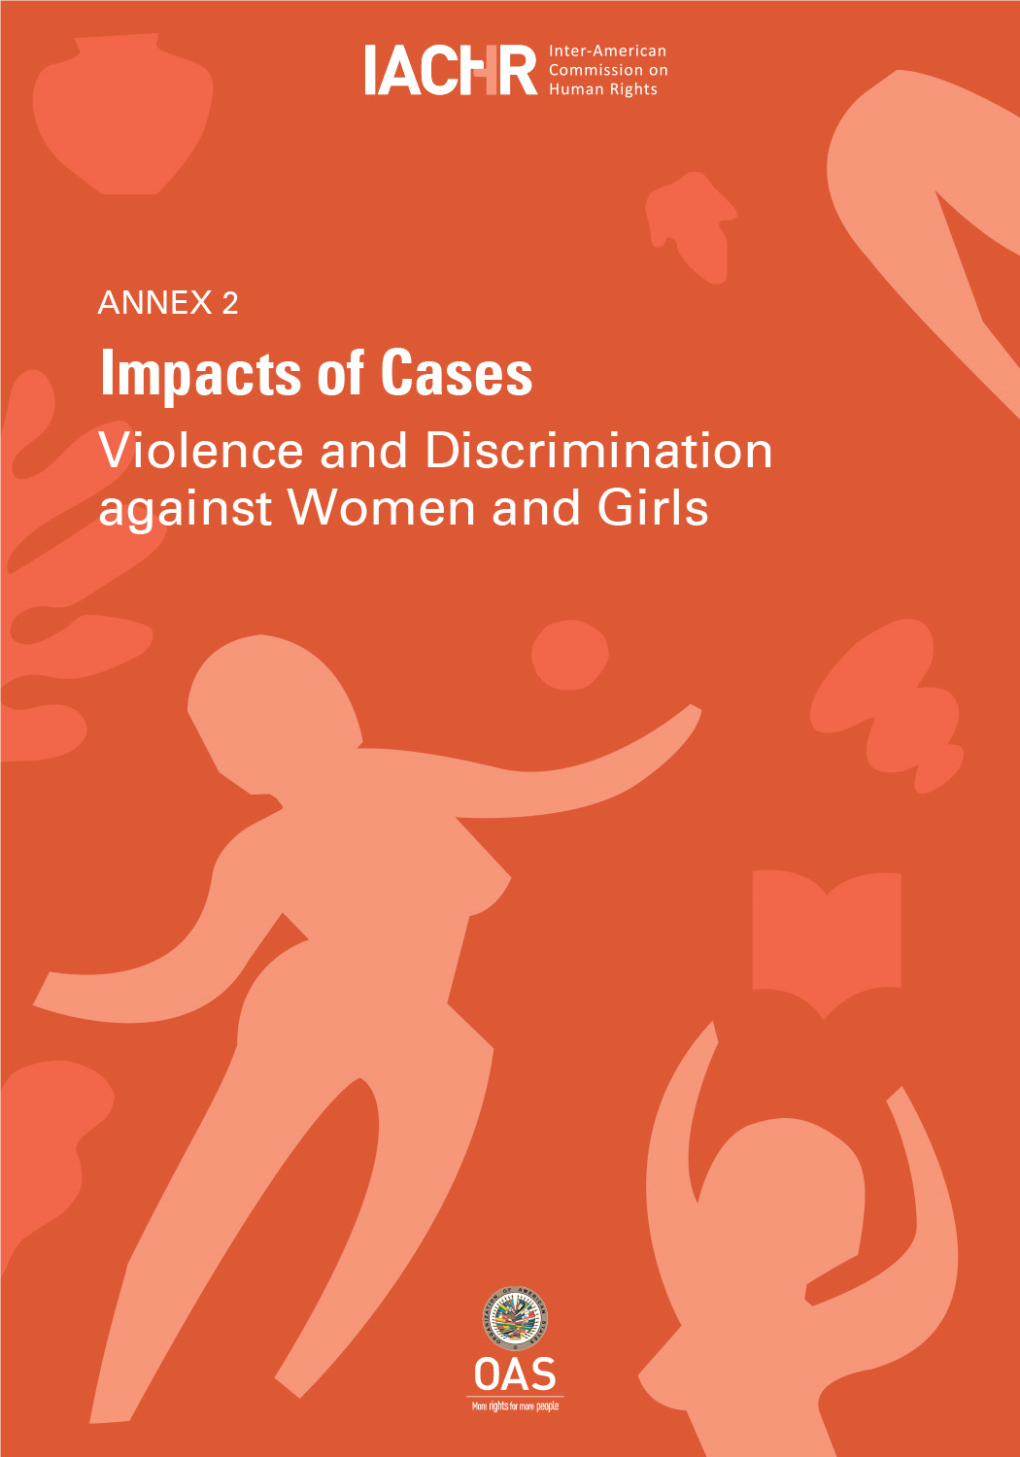 Impacts of Cases of Discrimination and Violence Against Women, Girls and Adolescents